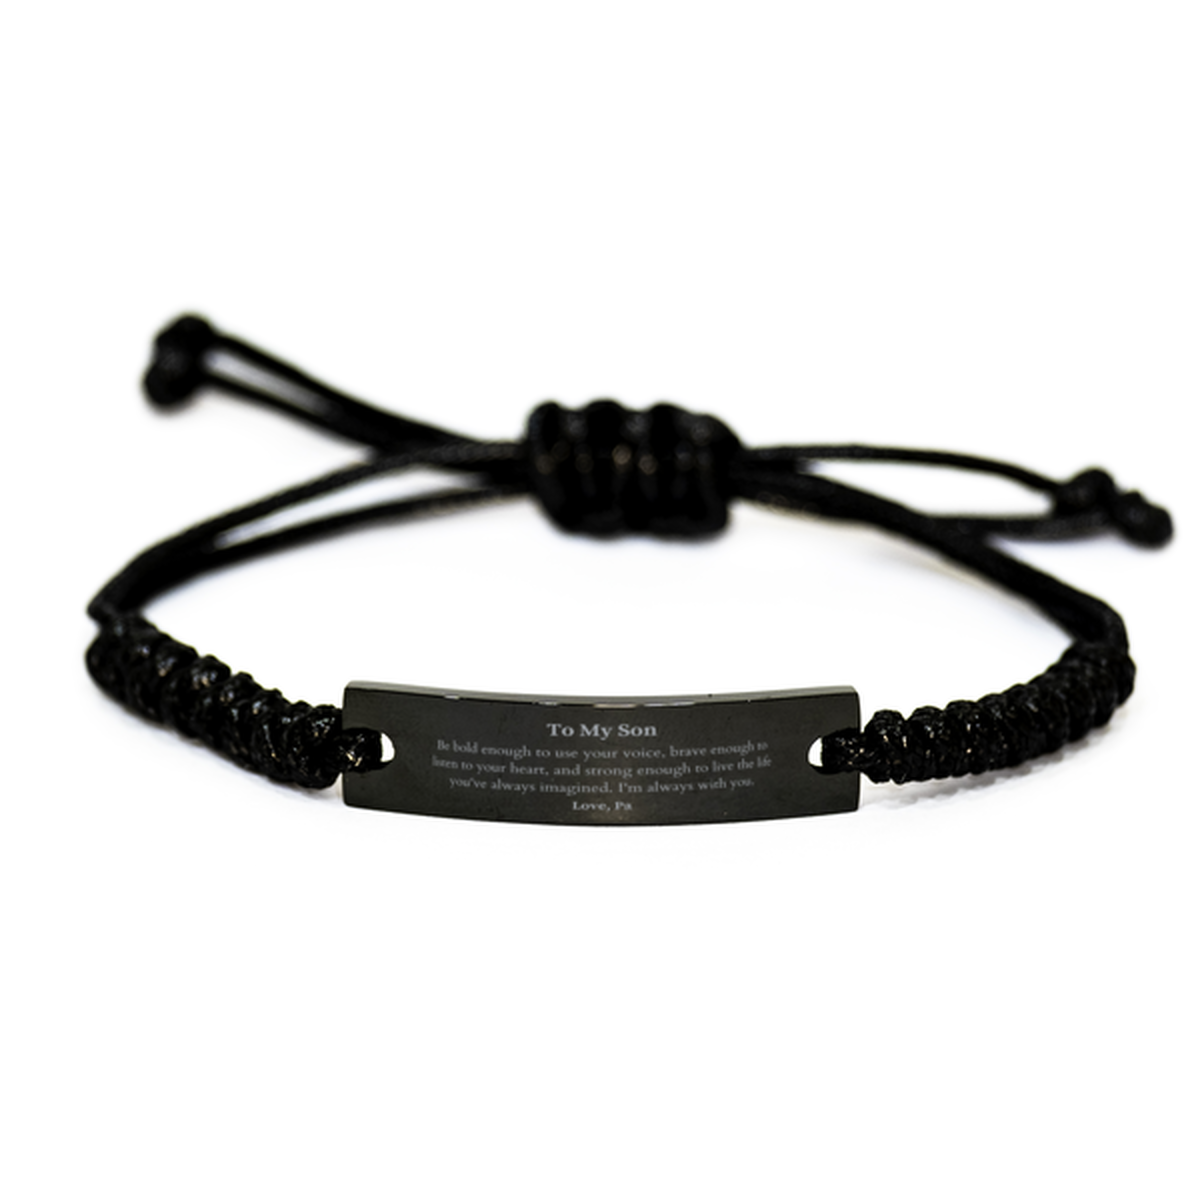 Keepsake Son Black Rope Bracelet Gift Idea Graduation Christmas Birthday Son from Pa, Son Be bold enough to use your voice, brave enough to listen to your heart. Love, Pa